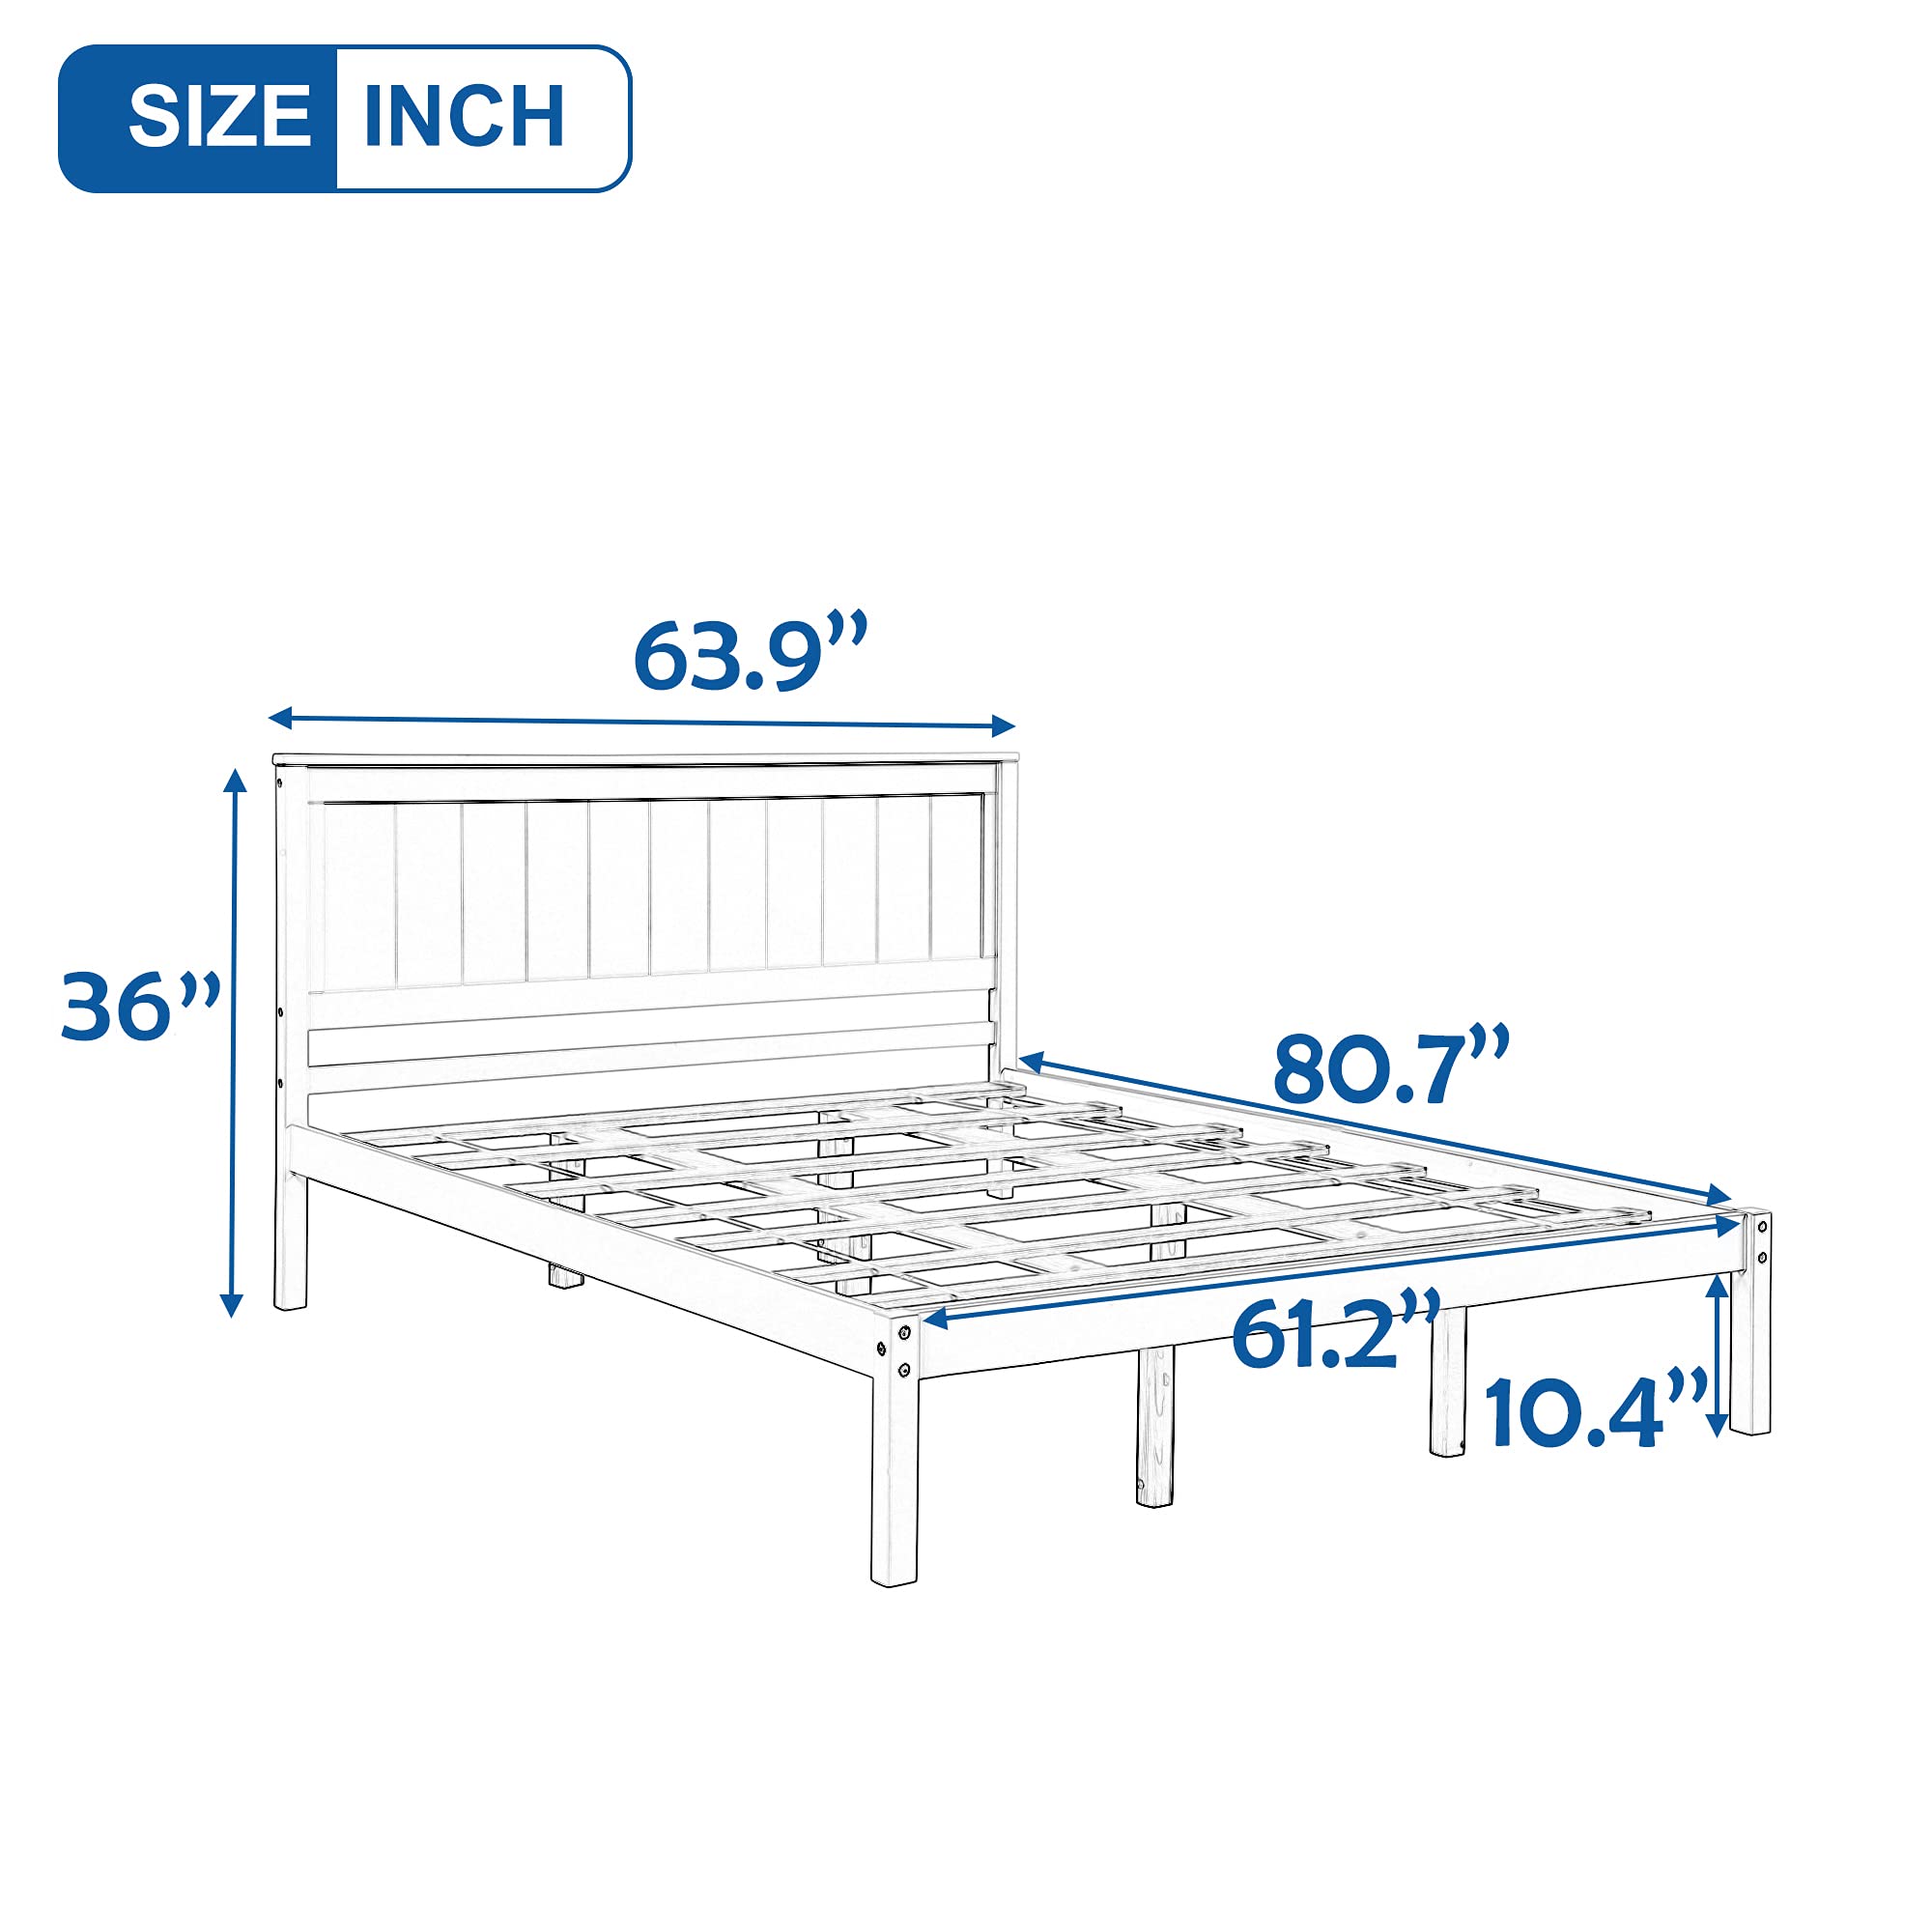 Queen Size Platform Bed Frame with Headboard, Wood Platform Bed with Slat Support